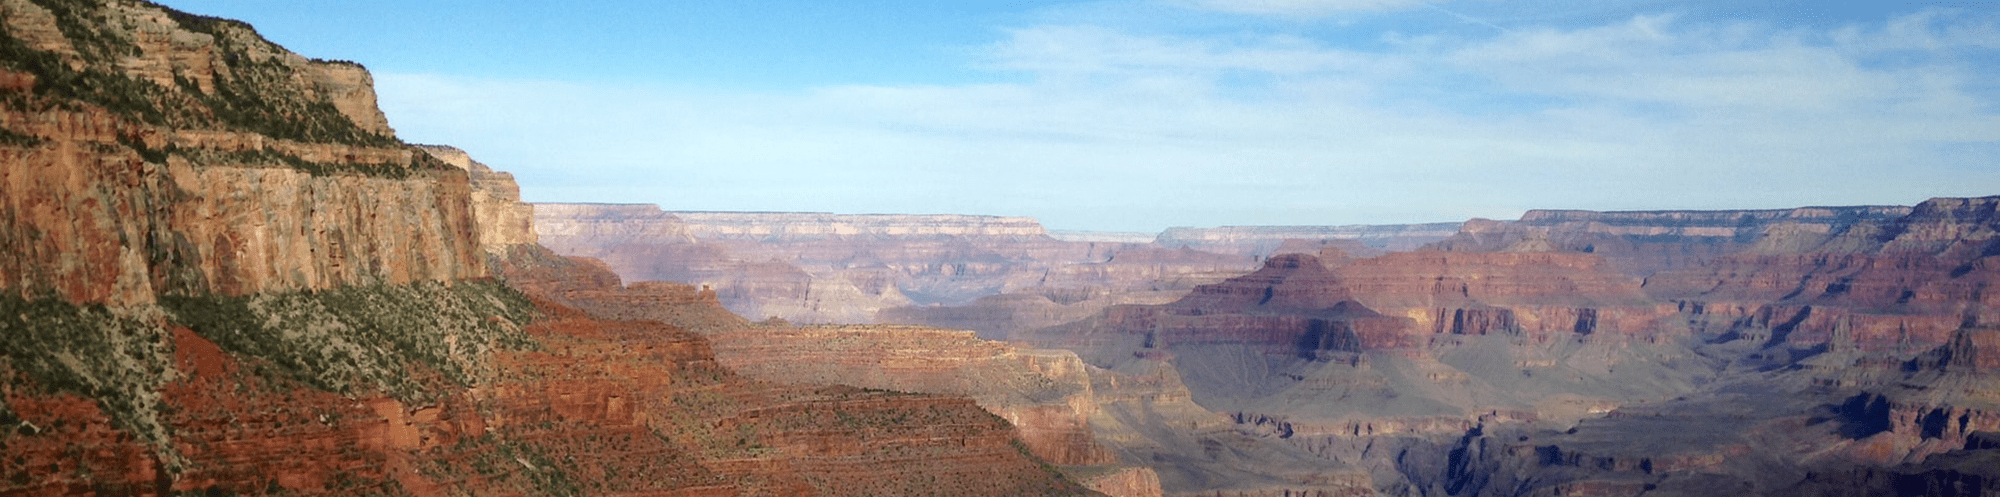 Wide view of canyons